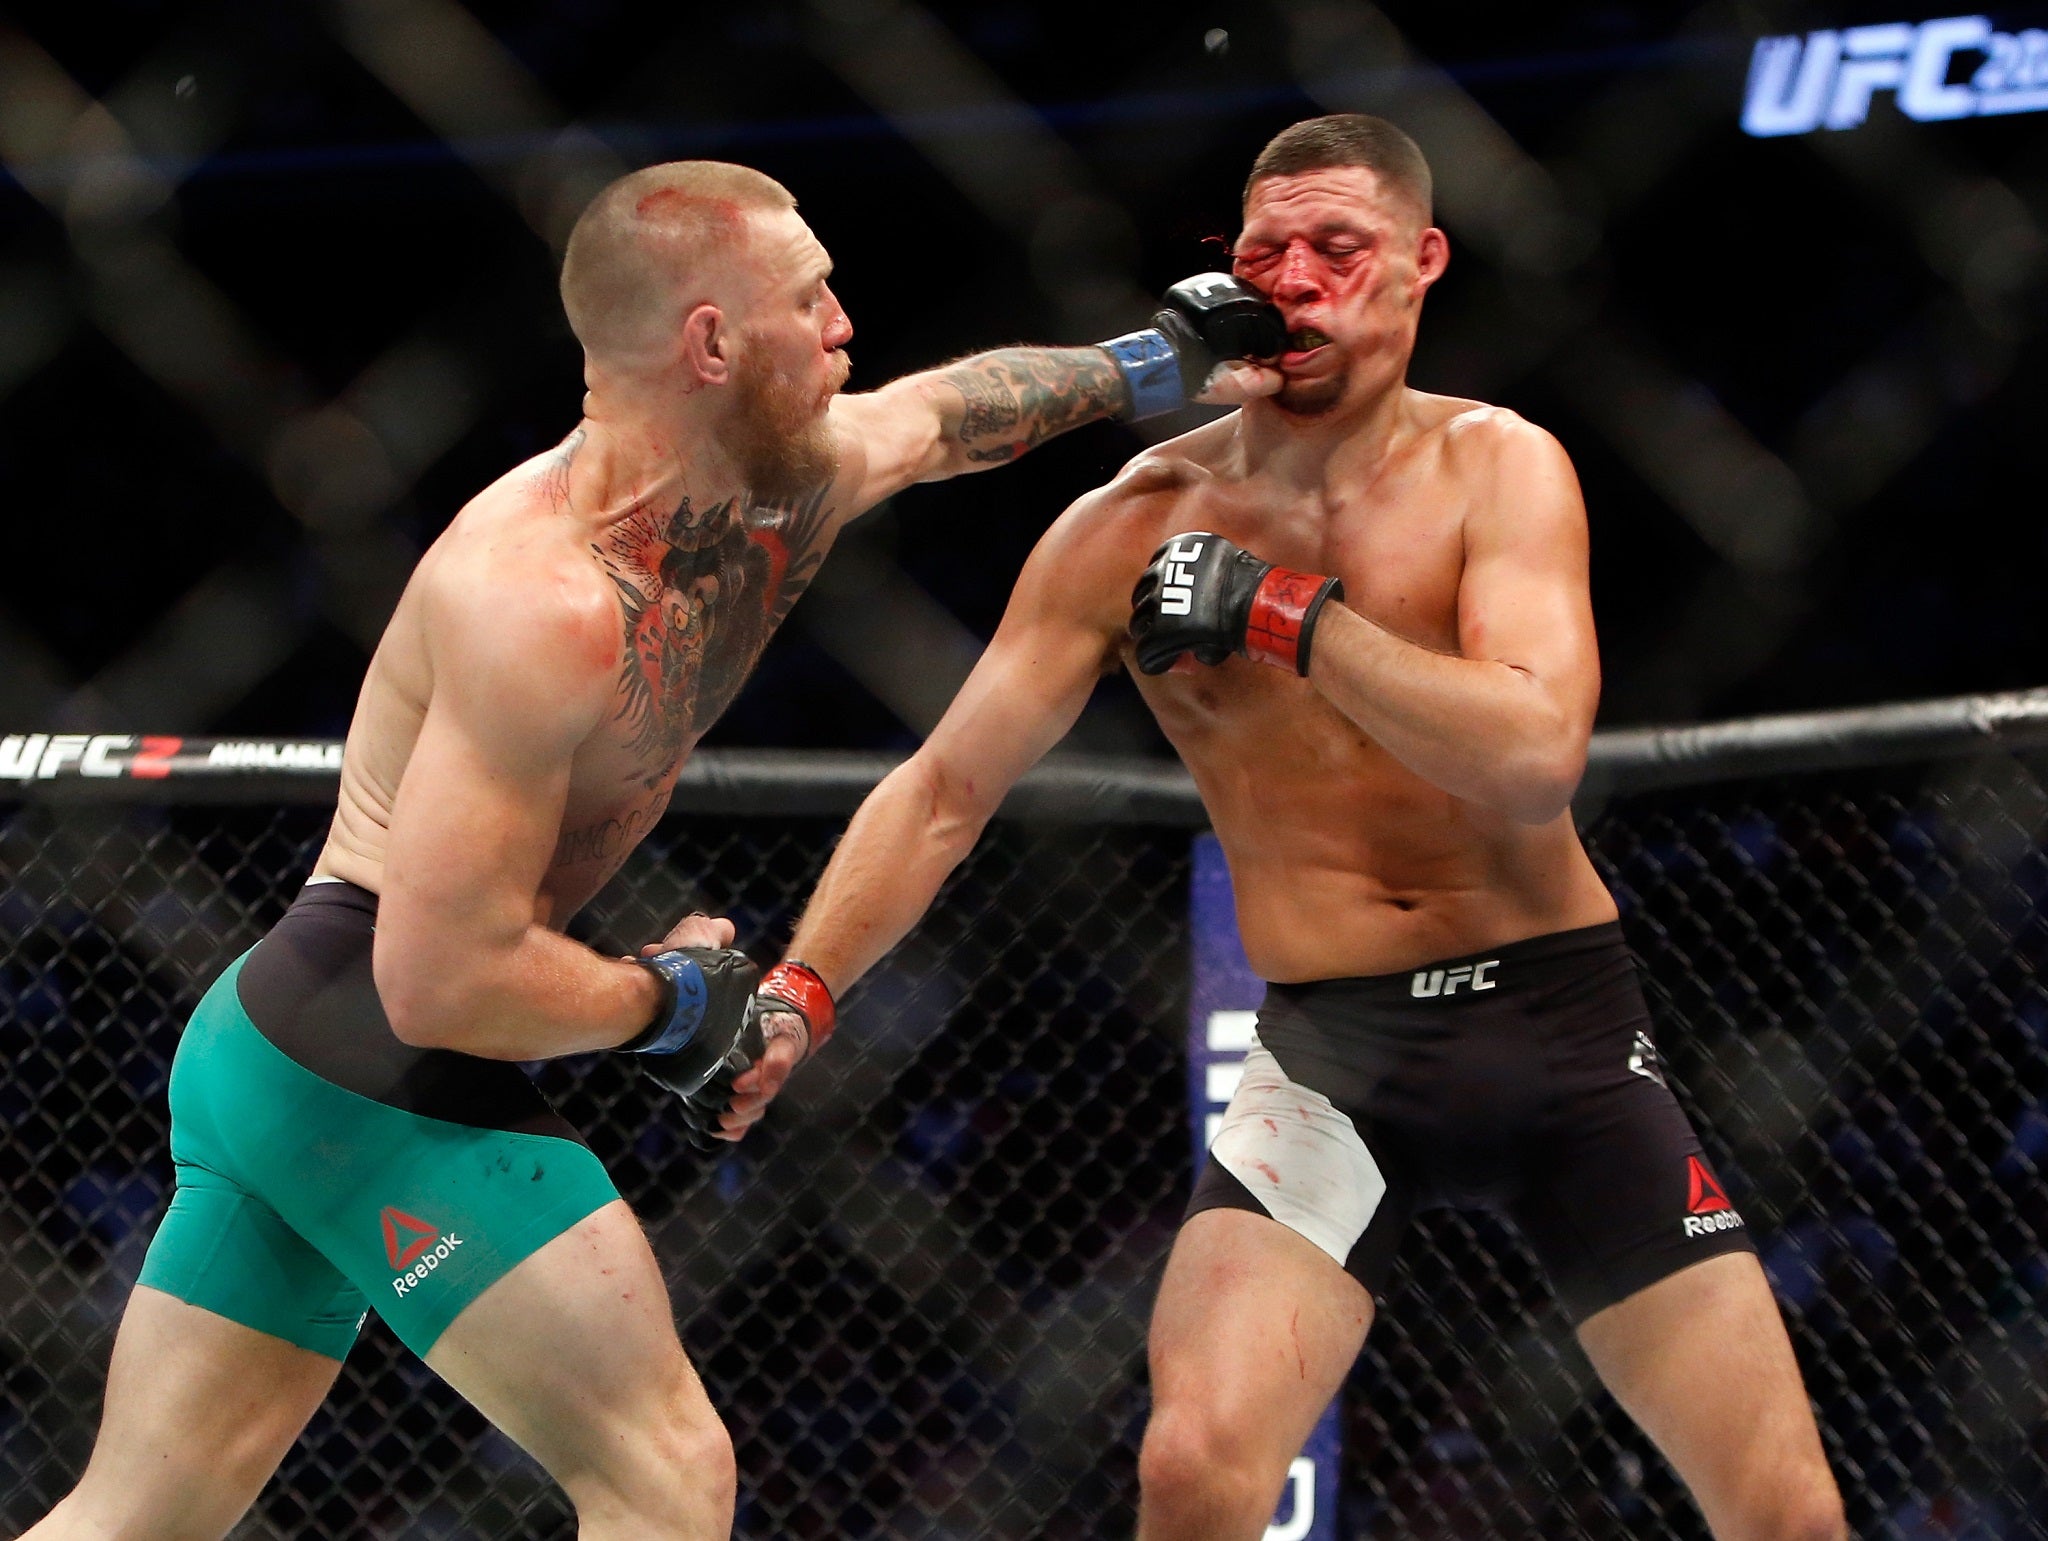 Conor McGregor beat Nate Diaz by majority decision at UFC 202